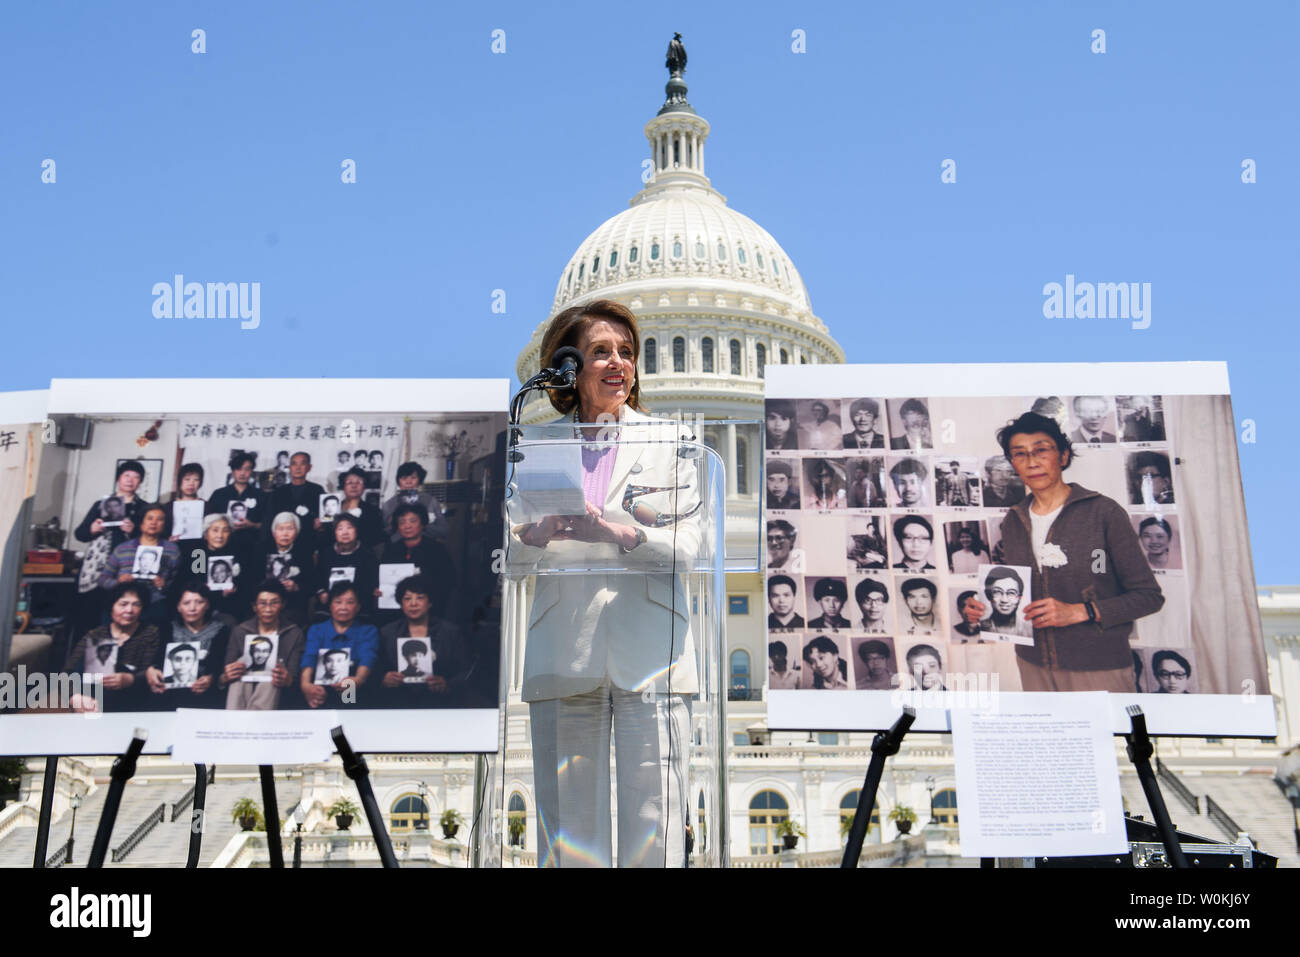 Speaker of the House Nancy Pelosi, D-CA, delivers remarks at an event remembering the 30th anniversary of Tiananmen Square and calling for an end to alleged human rights injustices and Communist rule in China, at the U.S. Capitol in Washington, D.C. on June 4, 2019. Pelosi spoke between photos of survivors of the Tiananmen Square massacre. Photo by Kevin Dietsch/UPI Stock Photo